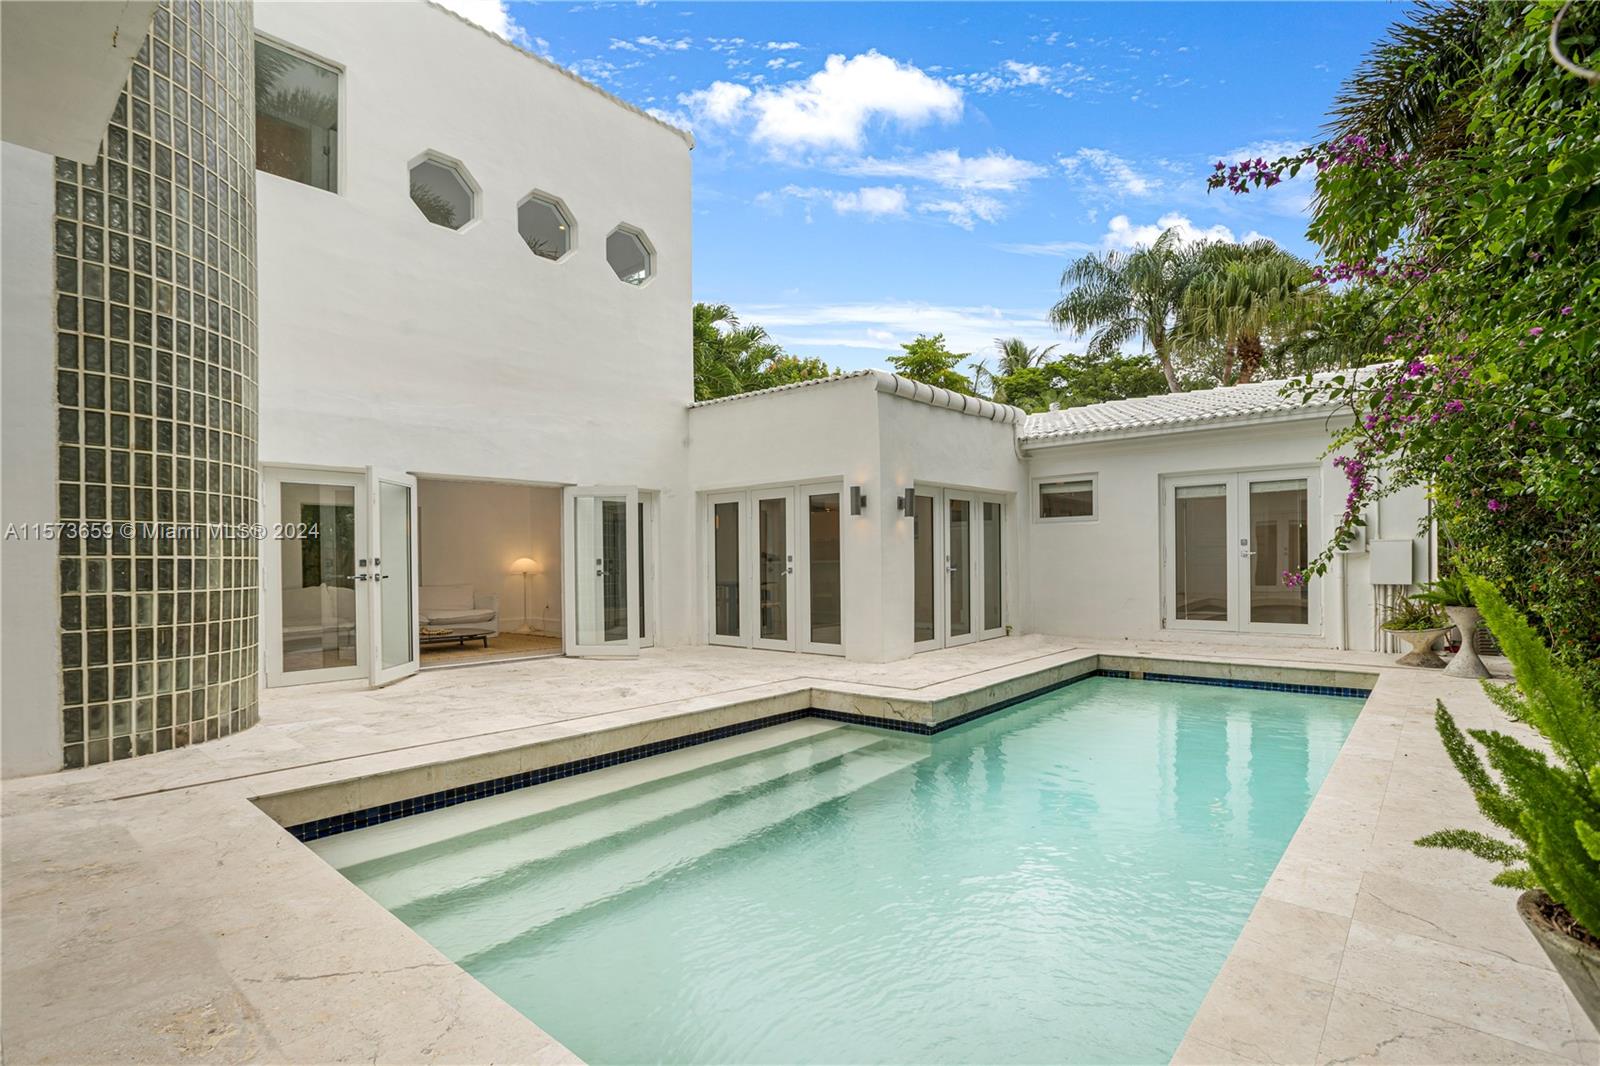 Multilevel home with St Barts villa vibes in a serene Coconut Grove location. Boho-chic design details abound in the airy layout featuring stark white interiors, light oak floors, glass block walls, porthole windows, high ceilings and a stunning spiral staircase. Upstairs suite enjoys a pool view from a Juliette balcony and a large sitting room with fireplace. Spacious open-plan living/dining/family area has a whitewashed vaulted ceiling and wide glass doors opening to a magnificent pool and lush tropical garden, perfect for indoor/outdoor entertaining. The compound is completely gated with ample parking for up to five cars. Stroll to pristine nature preserves and Biscayne Bay. Less than a mile from top schools and the Grove’s trendy shopping & dining options.